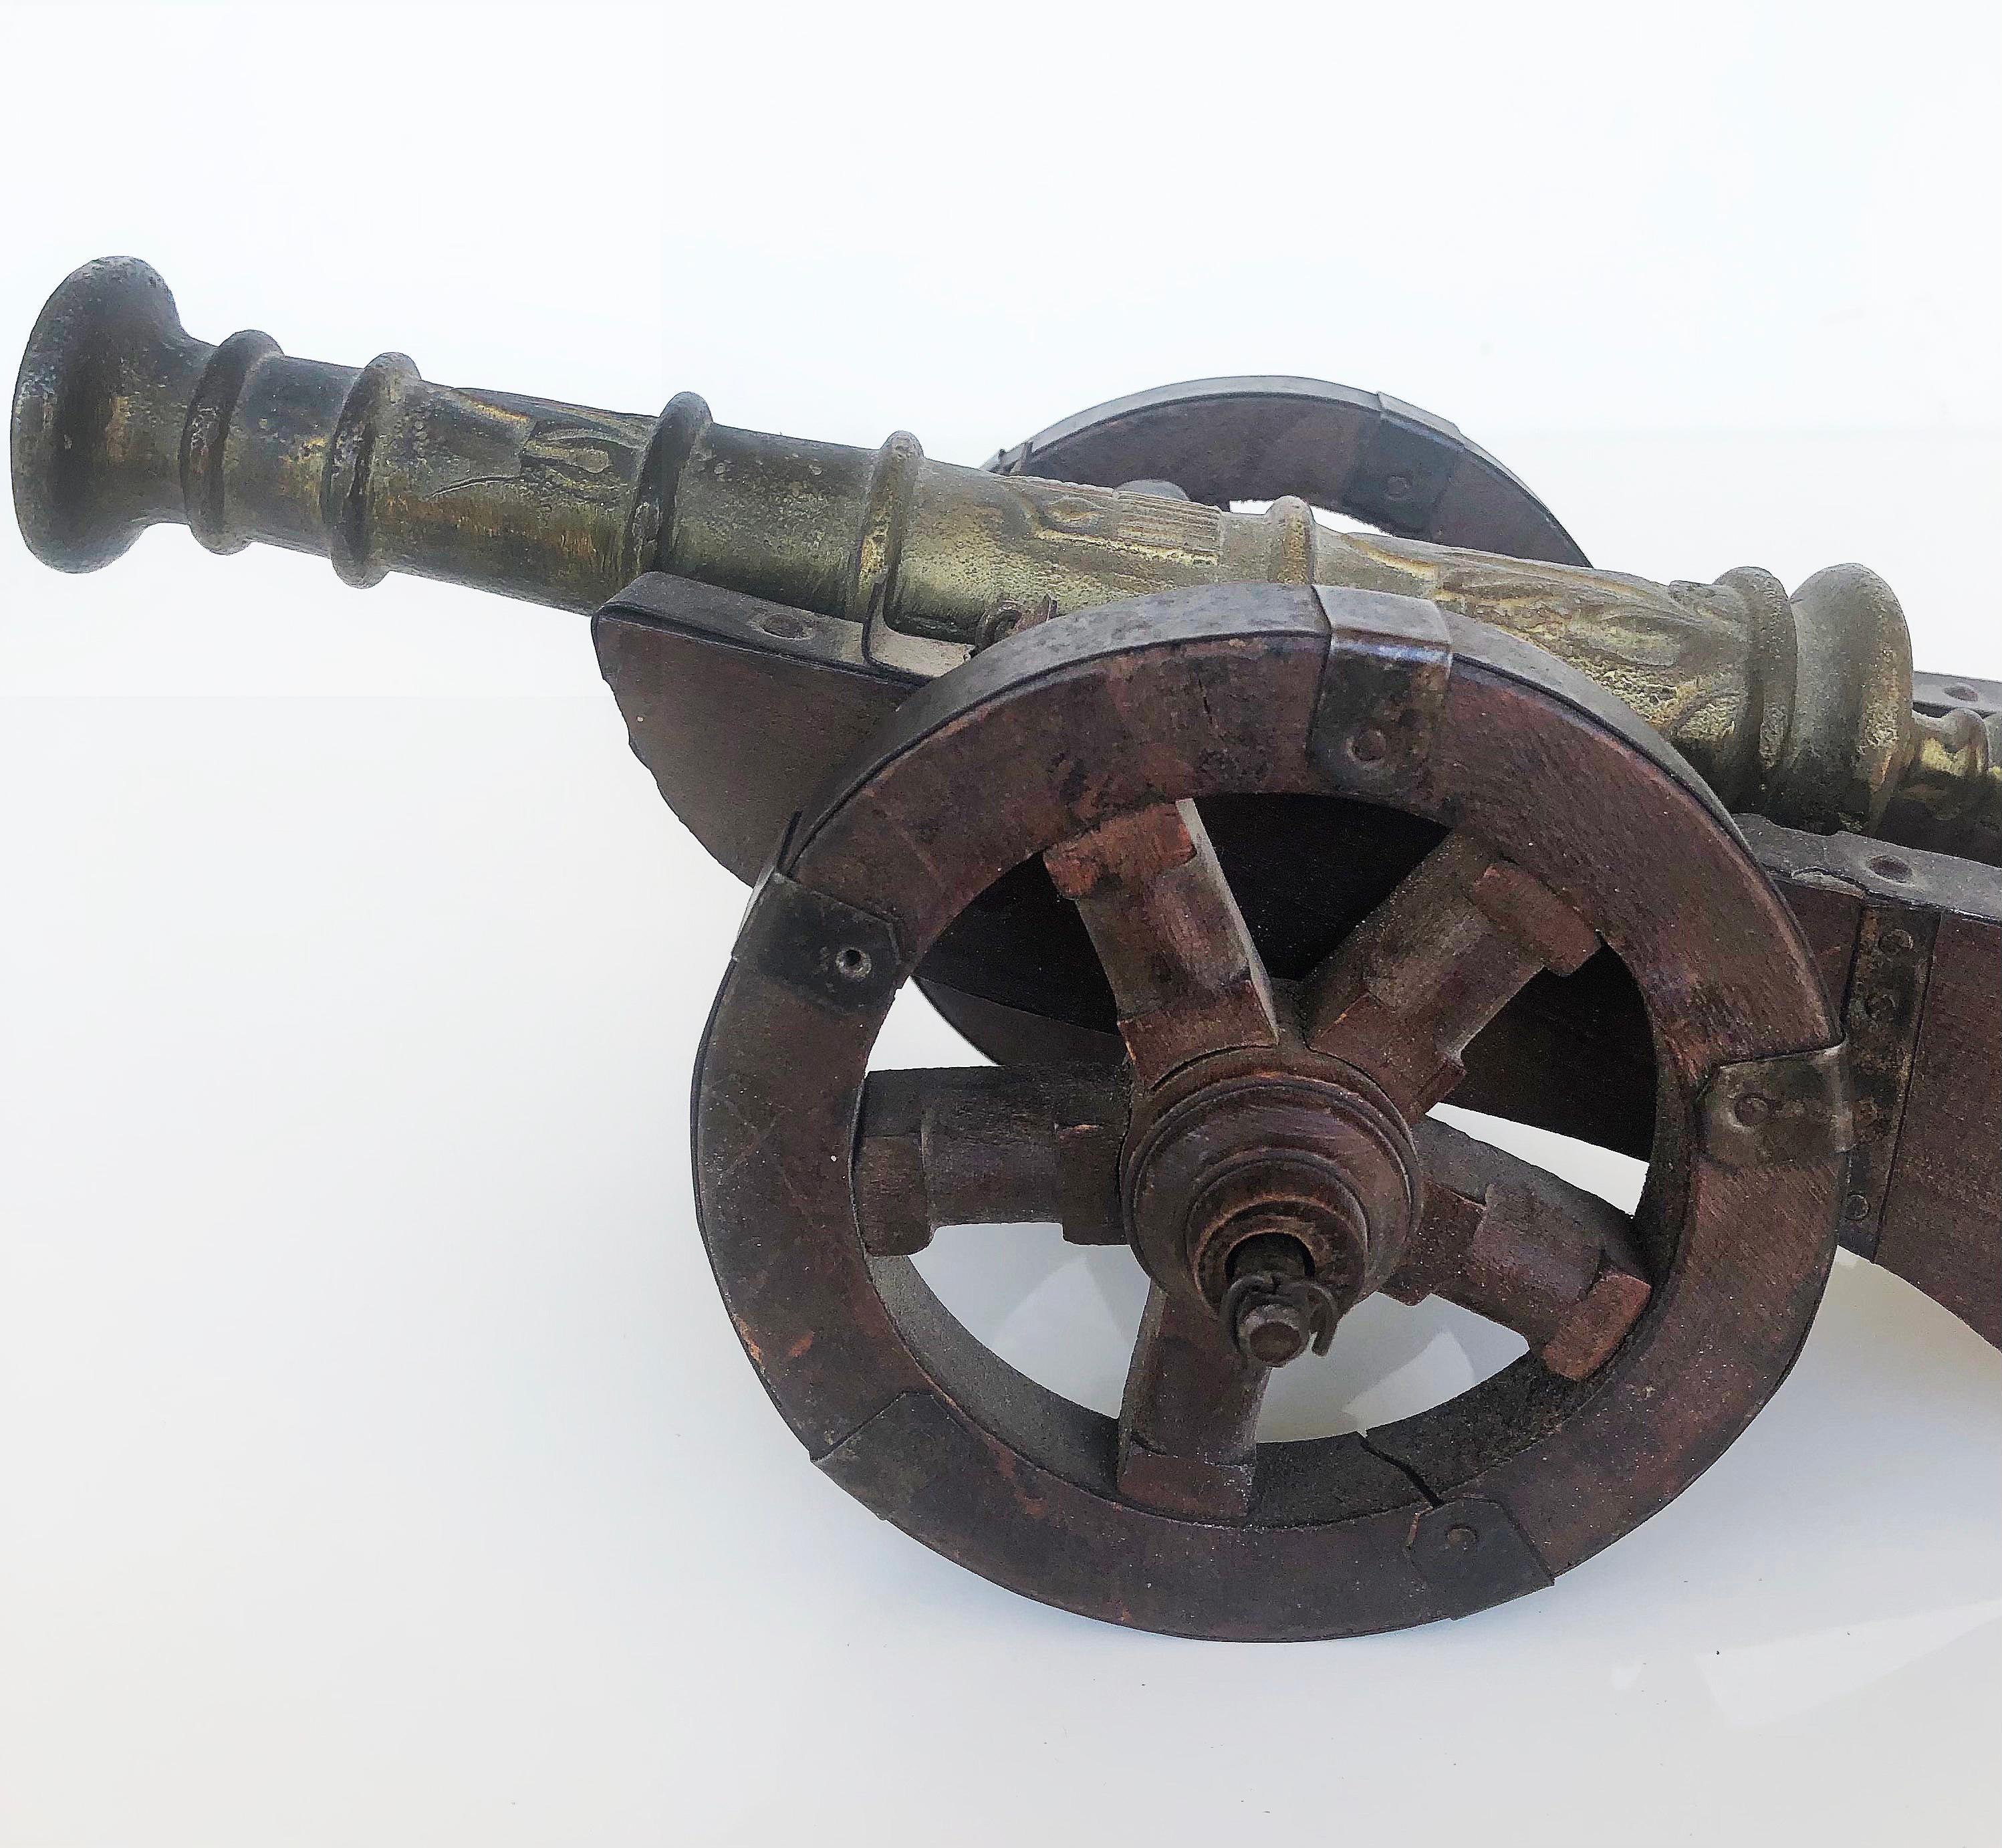 Antique miniature bronze cannon on carriage with wood & metal

Offered is an antique miniature bronze cannon on carriage with wood wheels and metal trim. This will look good on a desk or displayed on shelves.